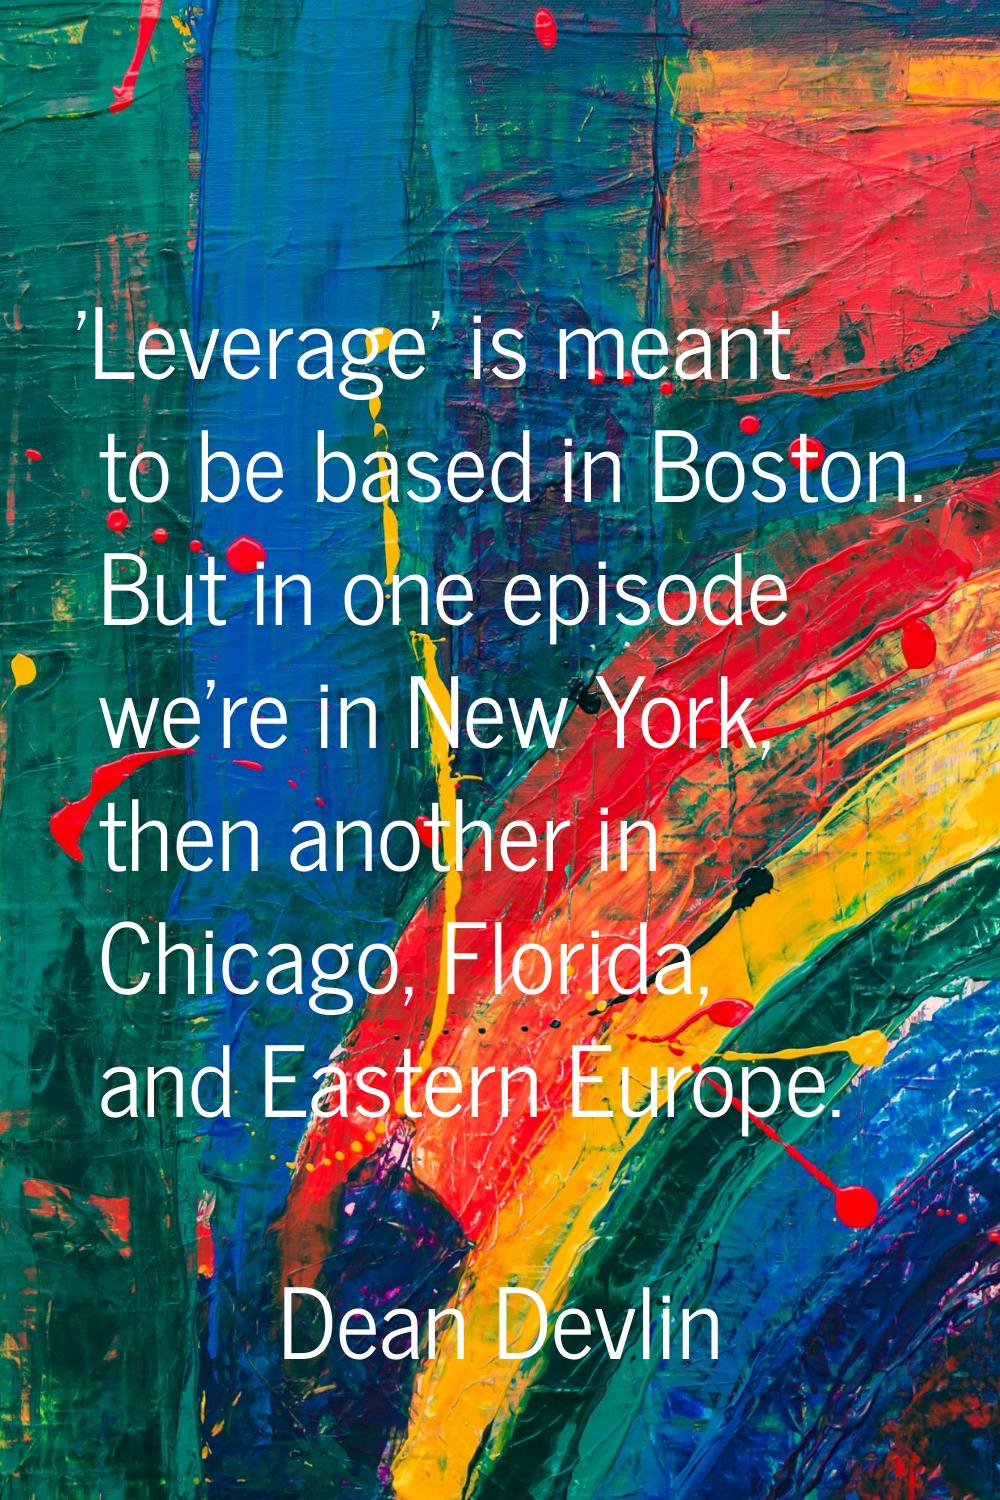 'Leverage' is meant to be based in Boston. But in one episode we're in New York, then another in Ch